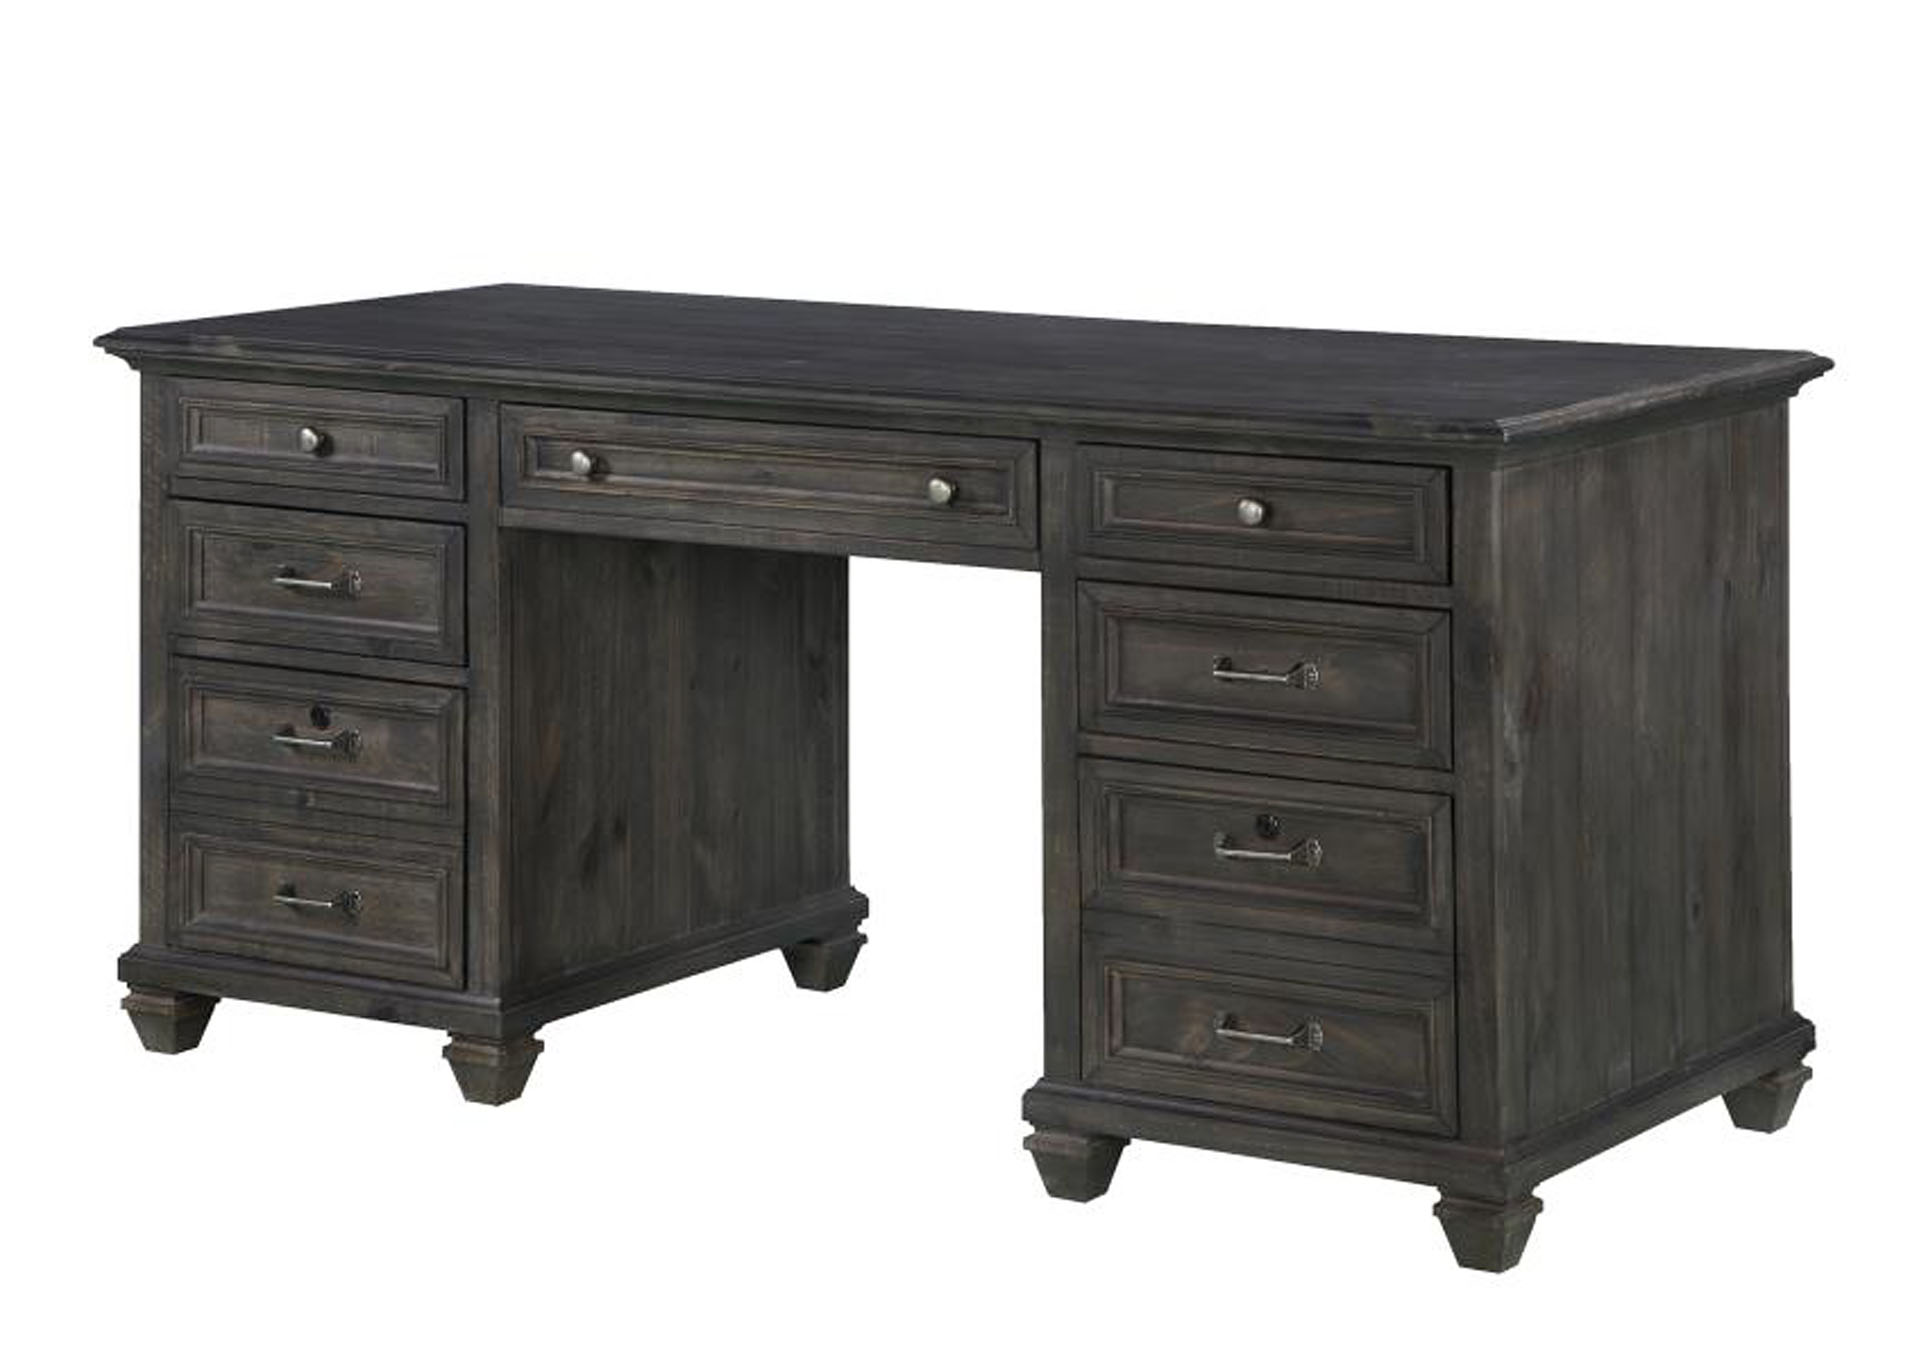 Sutton Place Weathered Charcoal Executive Desk,Magnussen